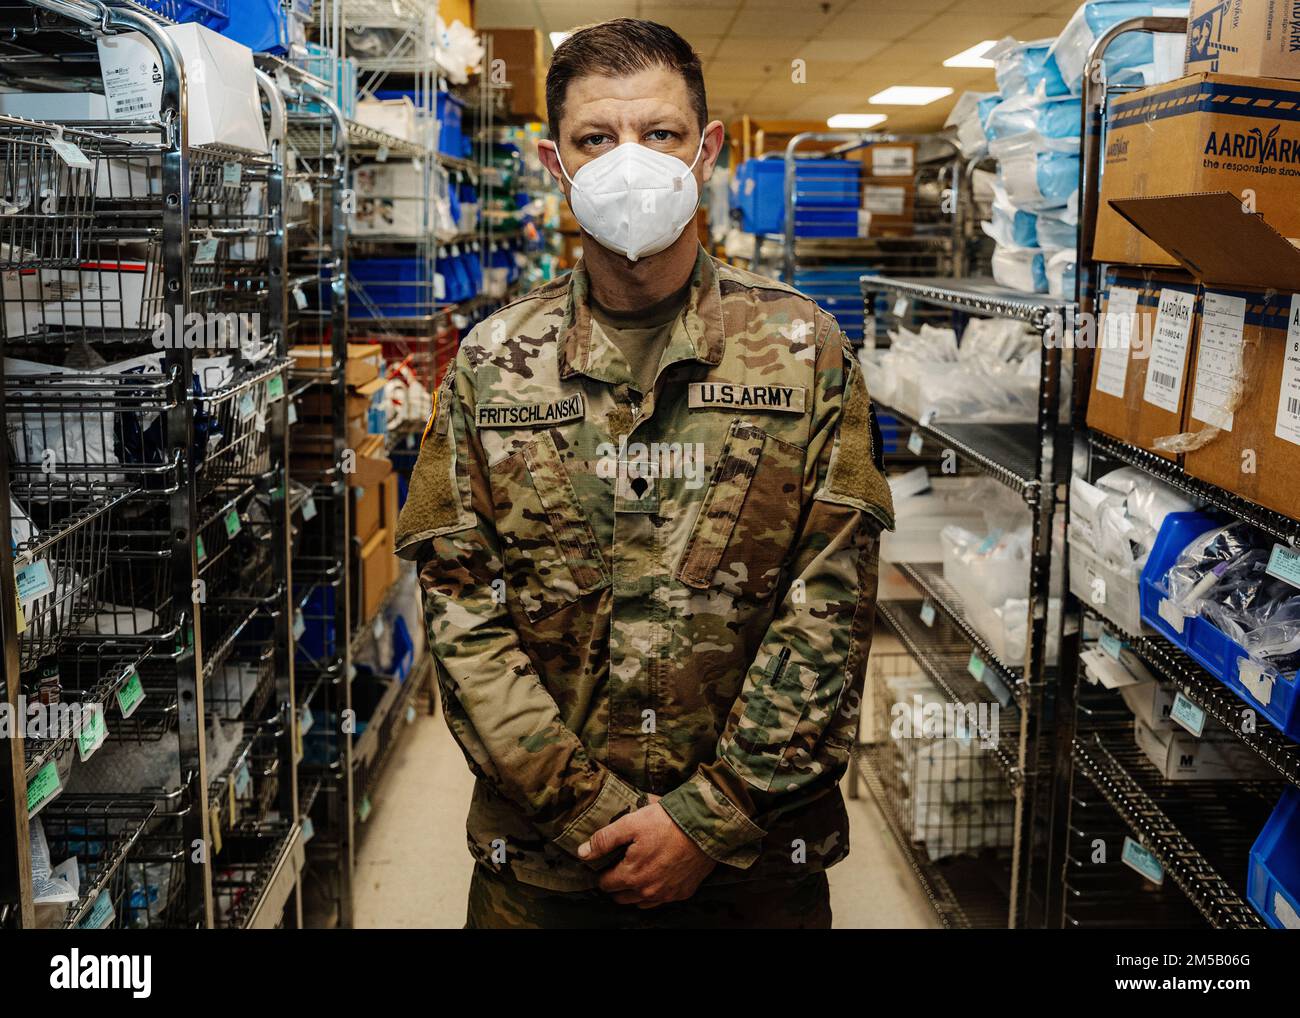 Spc. Mark Fritschlanski, an infantryman with the 1st Battalion, 175th Infantry Regiment Headquarters and Headquarters Company,  poses for a photo in the supply room at The Johns Hopkins Hospital in Baltimore, Maryland on Feb. 17, 2022. At the direction of Gov. Larry Hogan, up to 1,000 MDNG members were activated to assist state and local health officials with their COVID-19 response to include the distribution of COVID-19 test kits, 20 million KN95 and N95 masks, and other personal protective equipment and to provide support to skilled nursing facilities, hospitals, and testing sites. Stock Photo